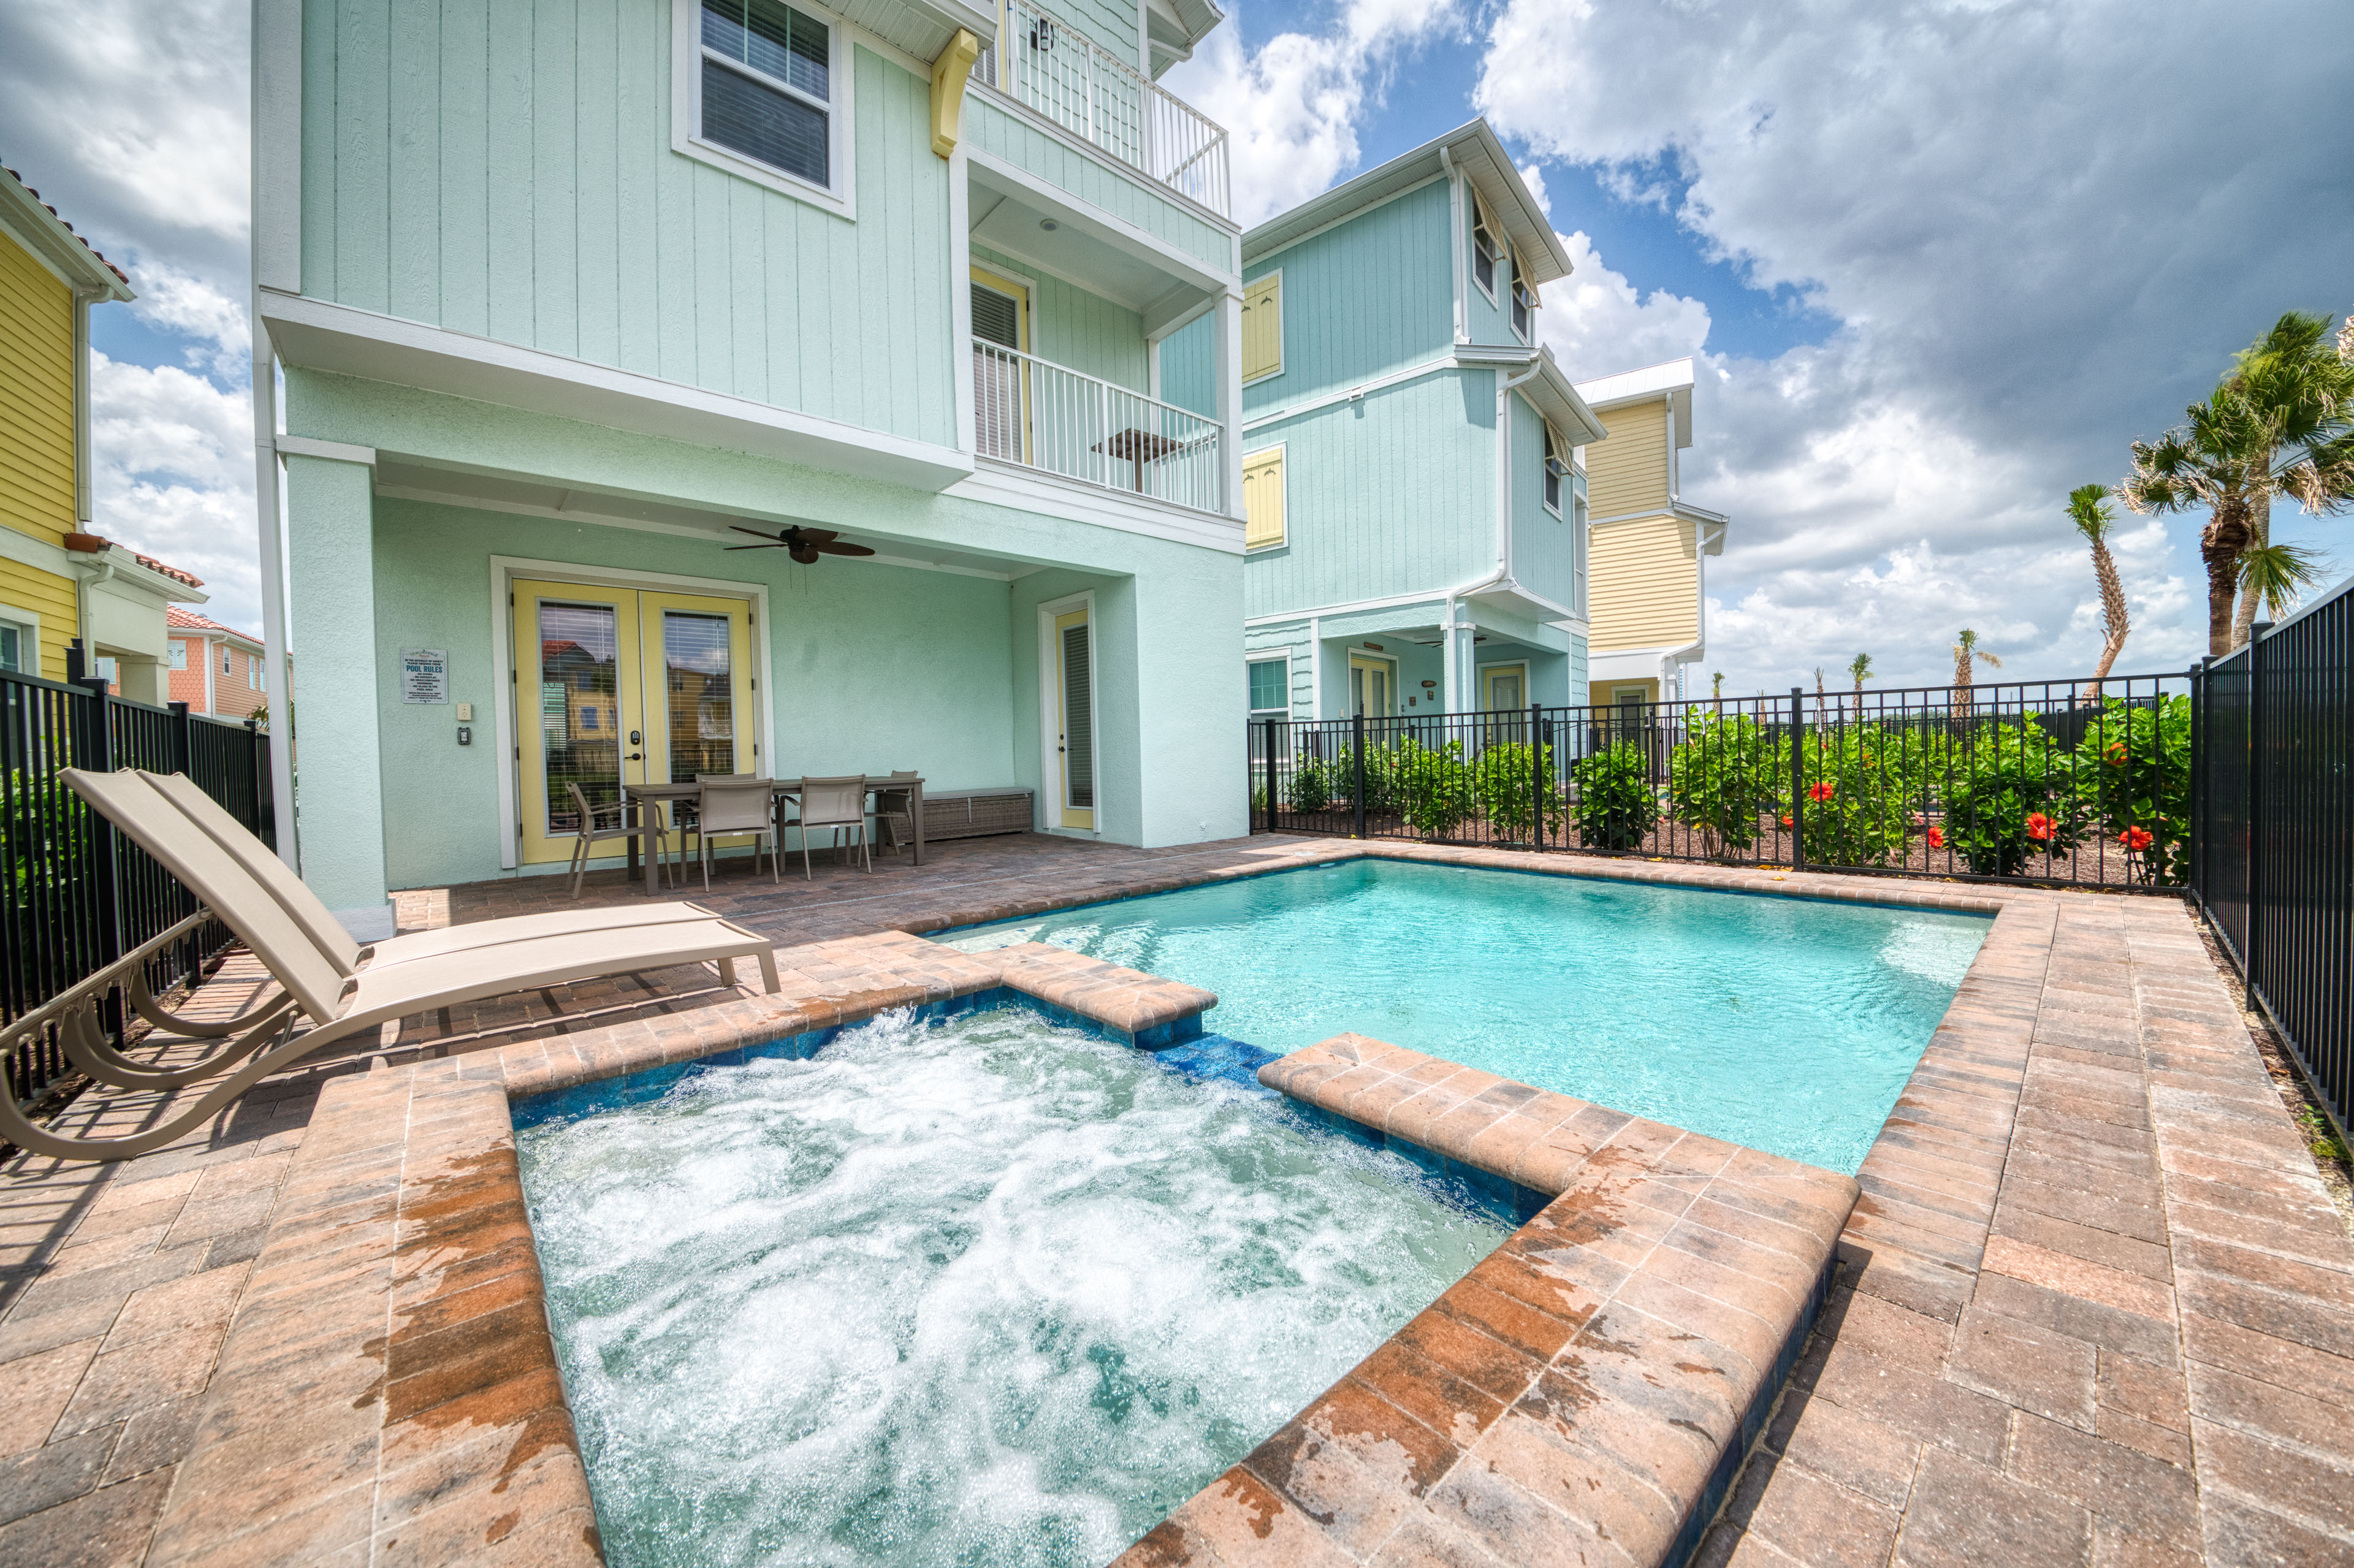 Property Image 2 - Bon Voyage Cottage with Private Pool near Disney with Margaritaville Resort Access - 8045SU